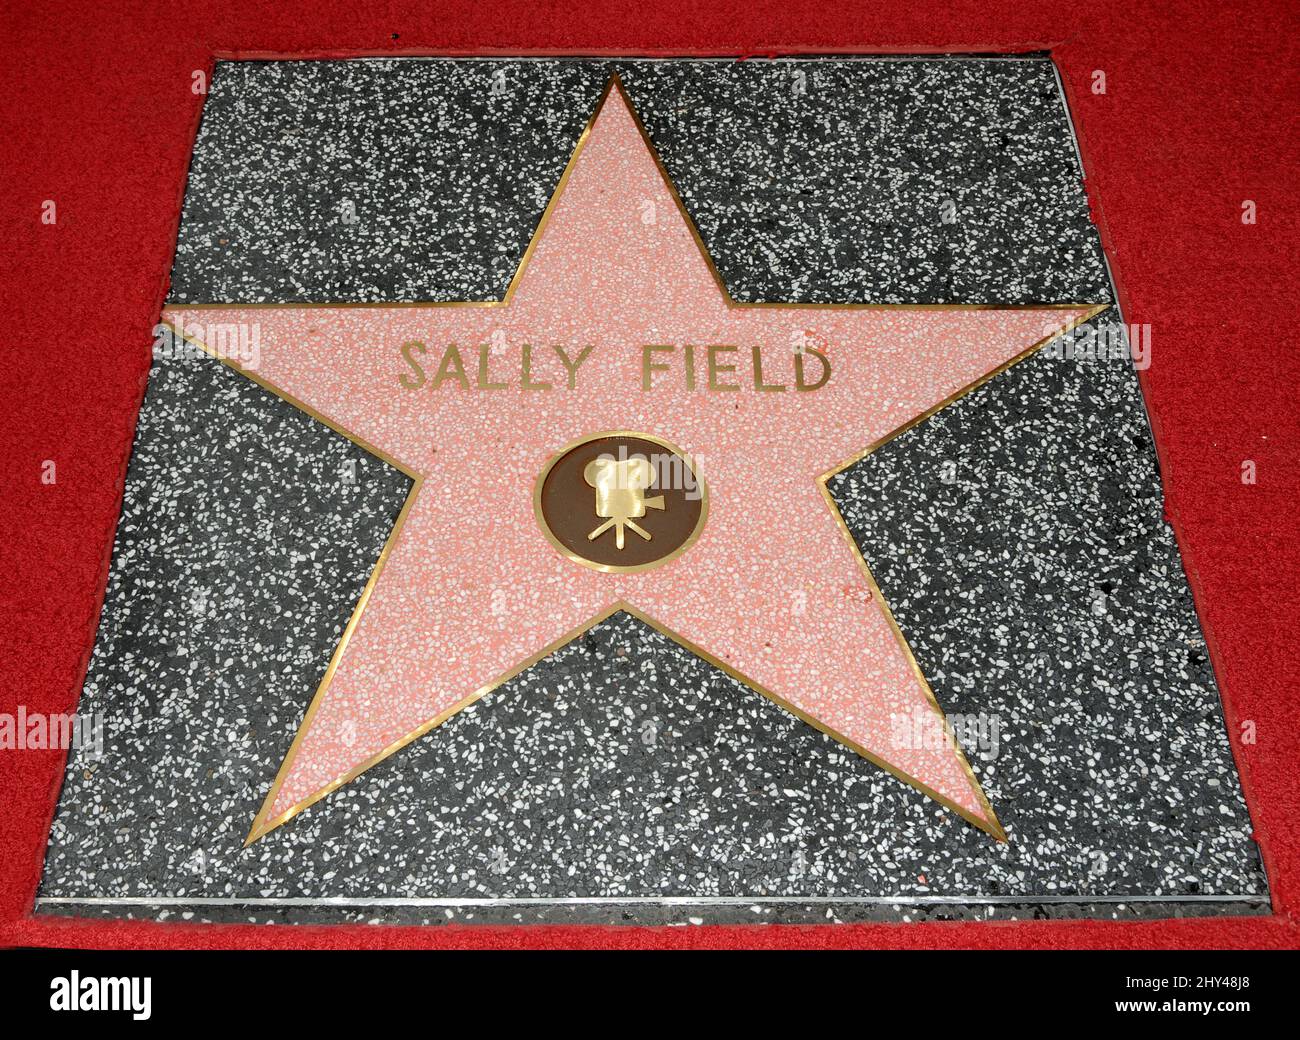 Sally Field's Star attending the Sally Field Hollywood Walk of Fame Star Ceremony in Los Angeles Stock Photo